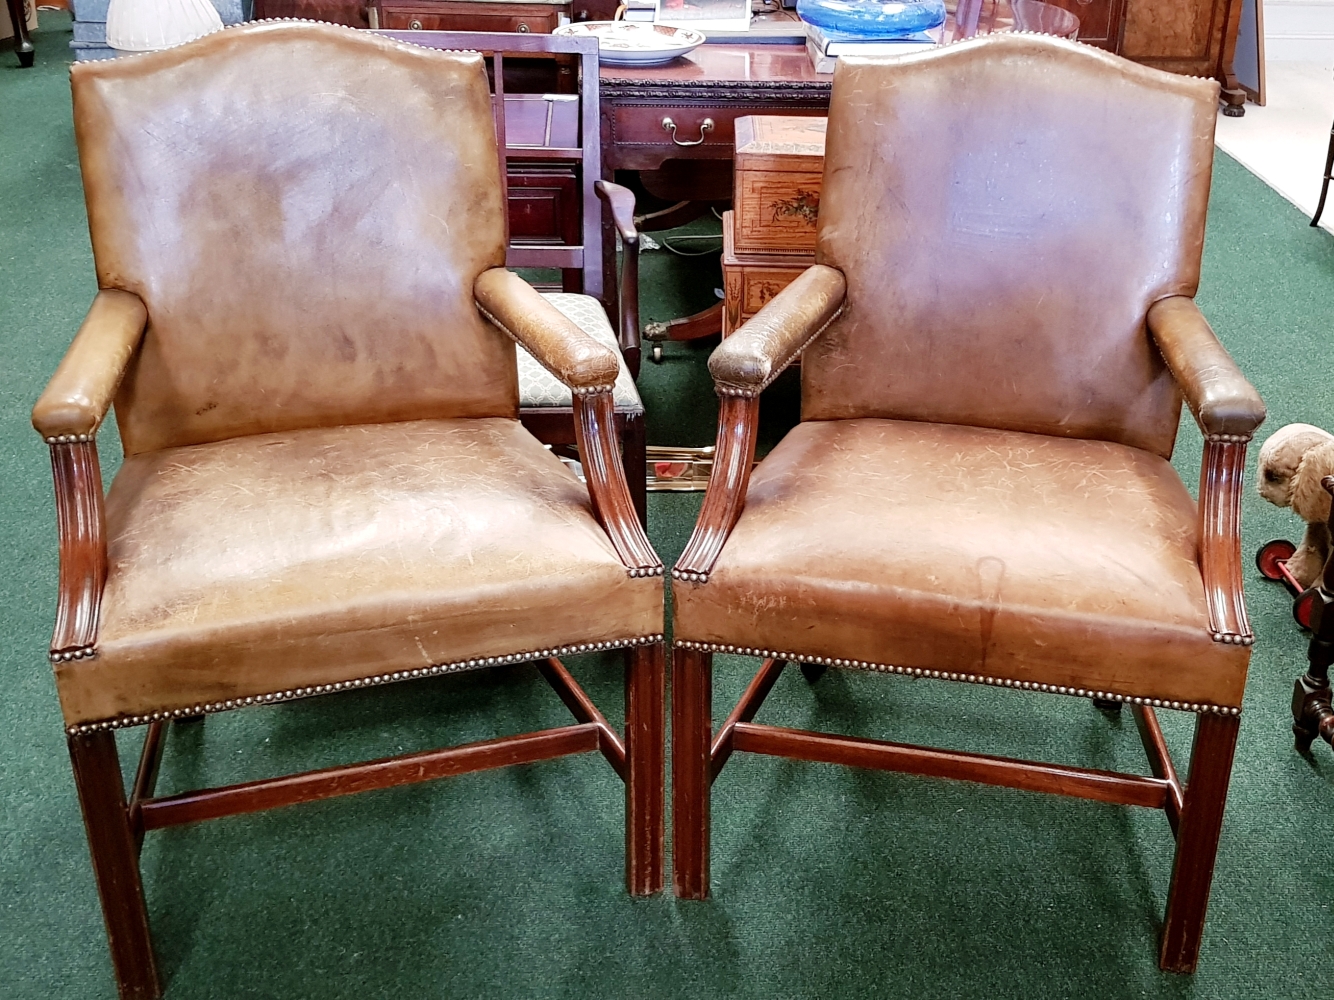 A PAIR OF GOOD QUALITY "GAINSBOROUGH" ARMCHAIRS, 20th century, with solid mahogany frame and leather